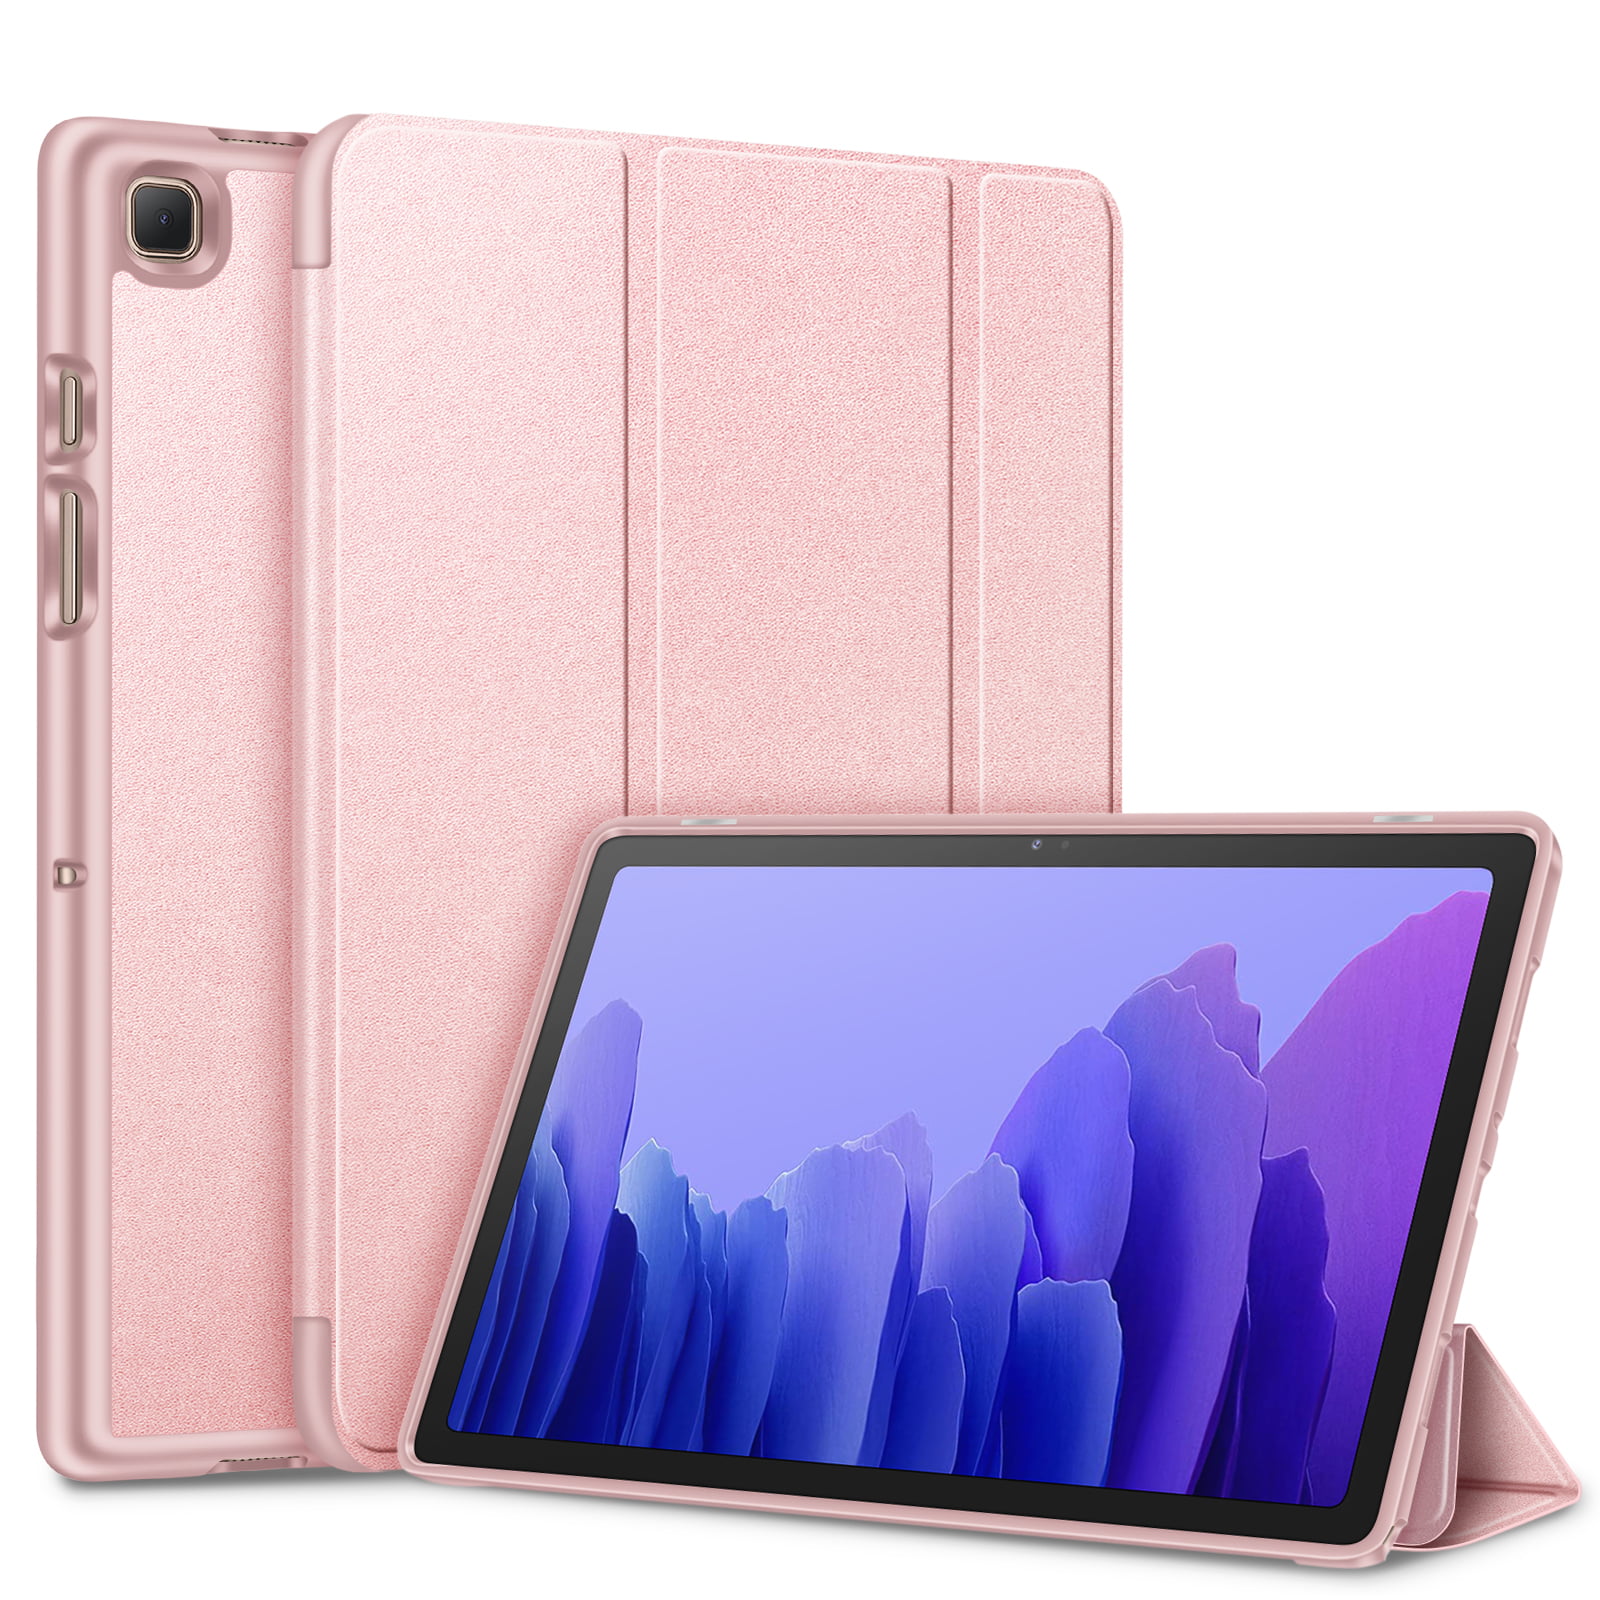 For Samsung Galaxy Tab A7 10.4'' 2020 Case (SM-T500/T505/T507) Fintie Soft TPU Slim Stand Back Cover Smart Auto Wake/Sleep Feature Walmart.com